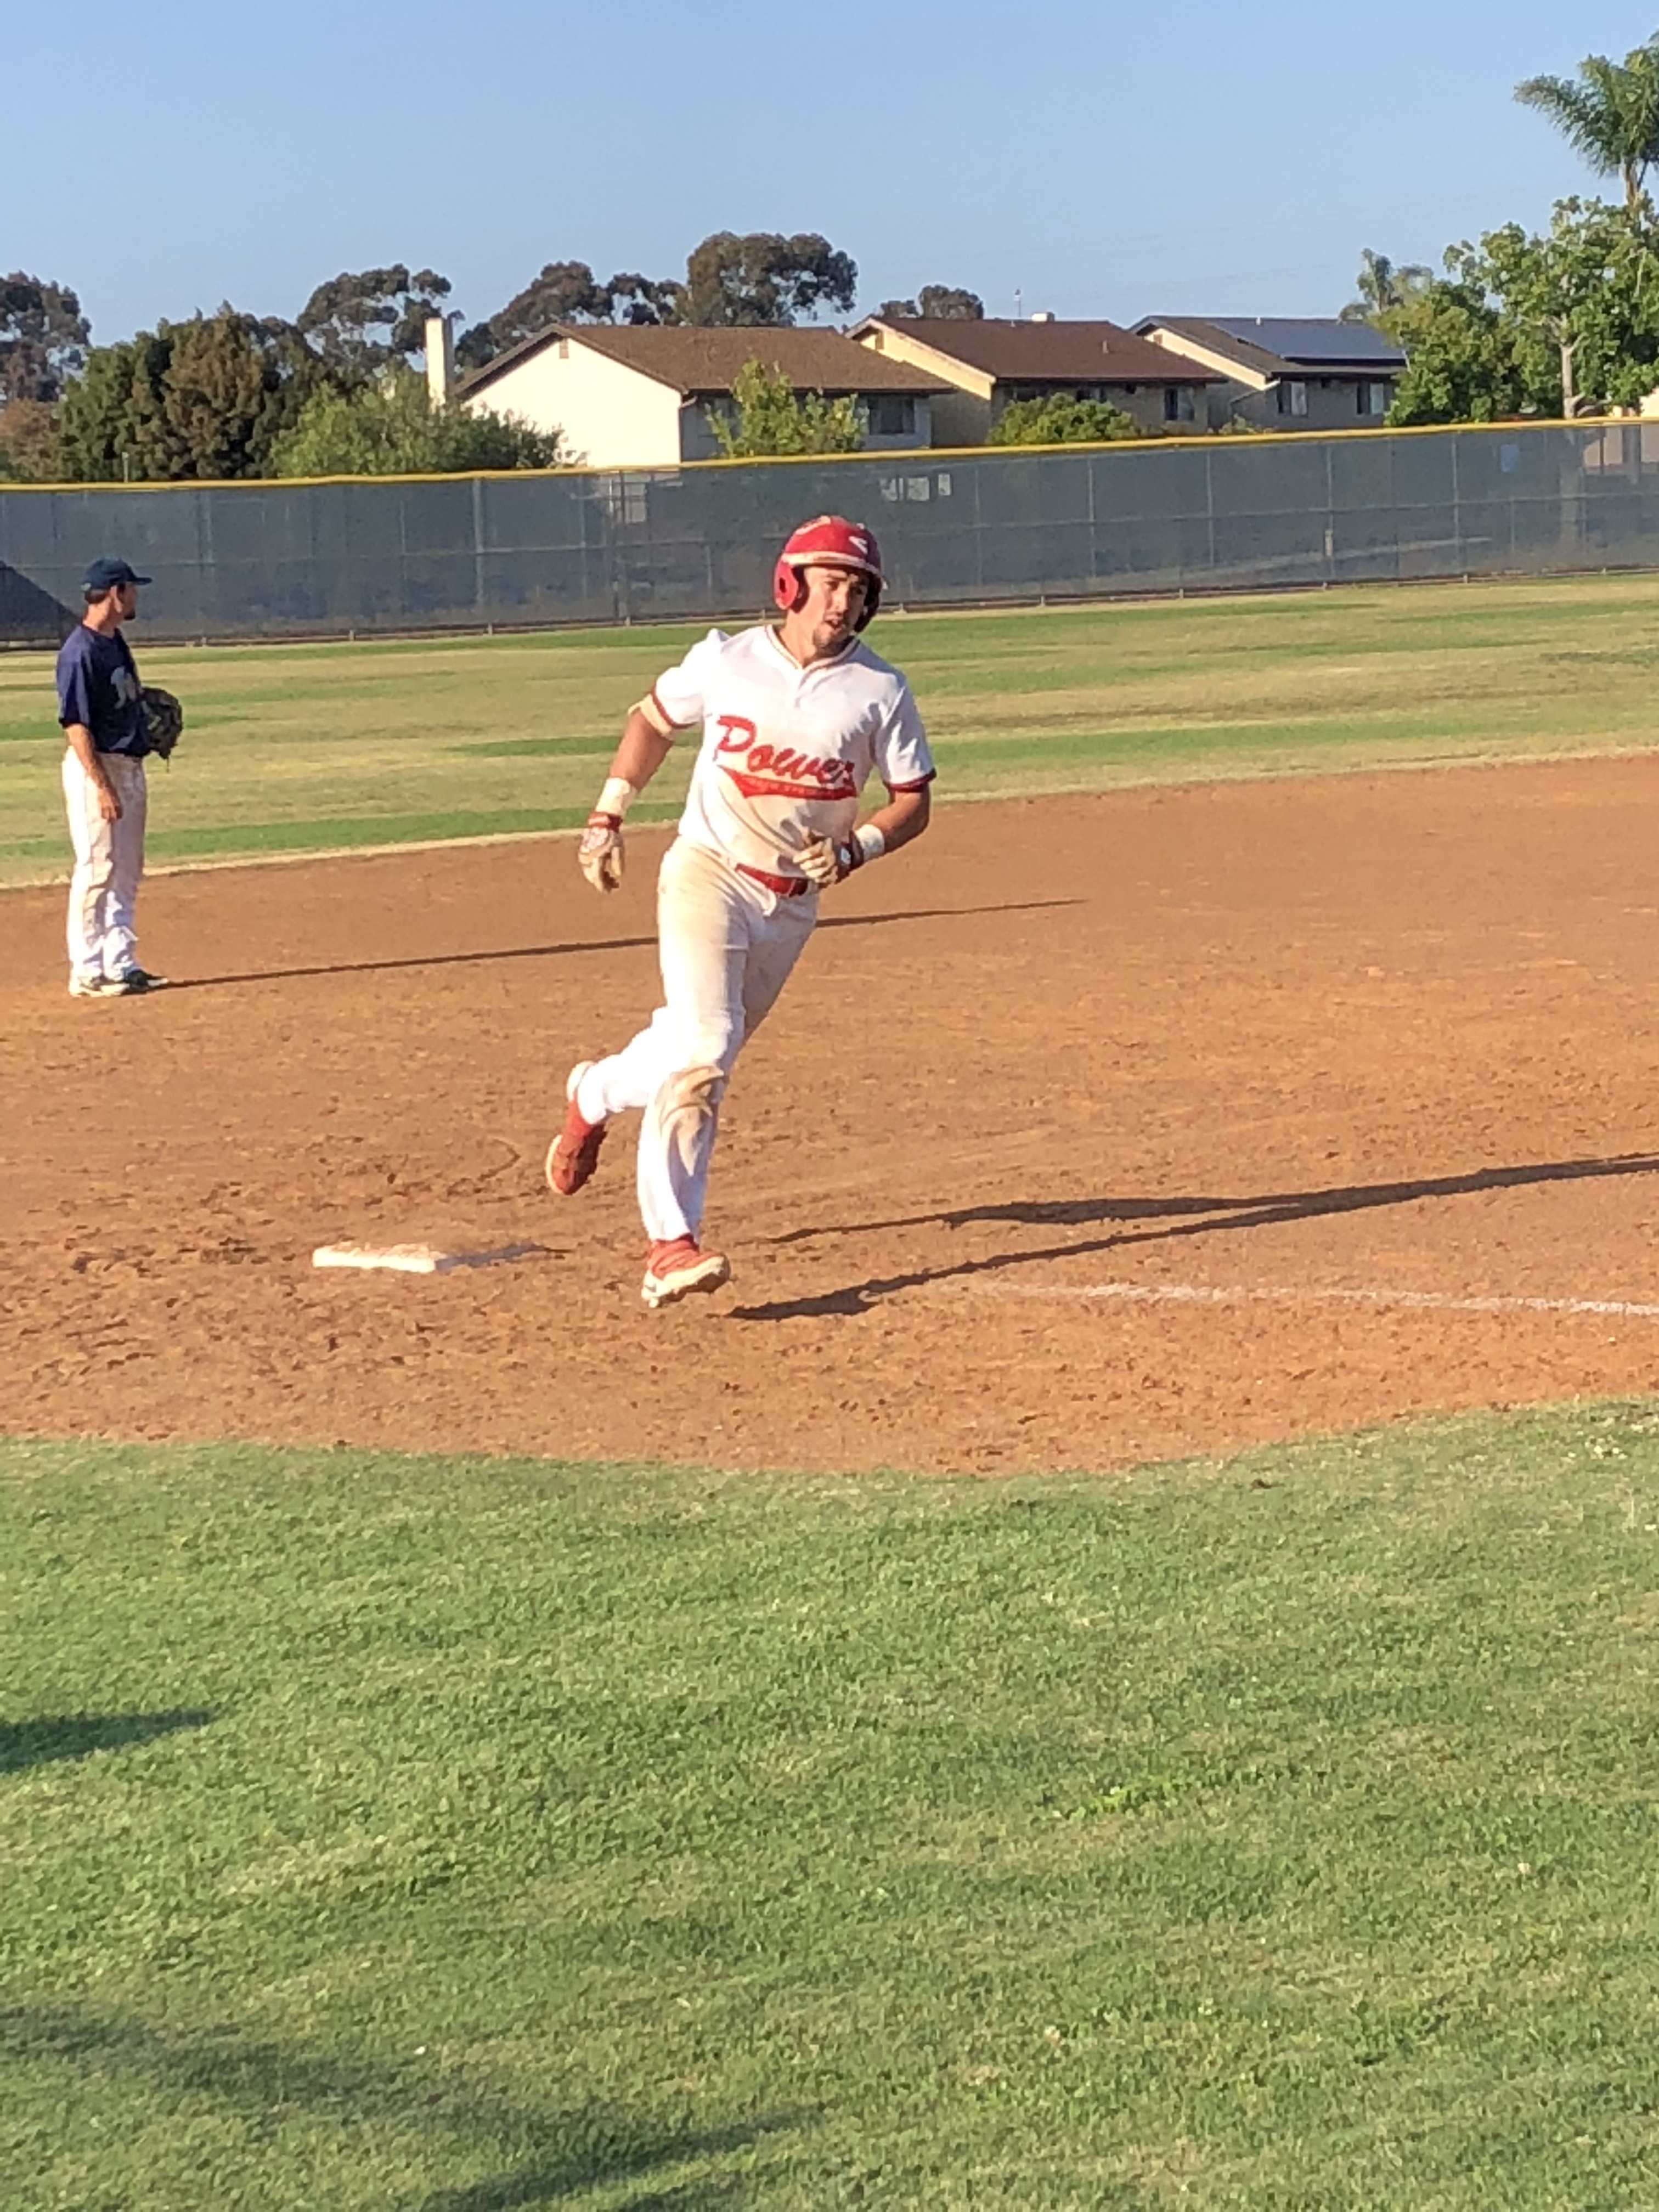 Schilling Paces POWER as they Split a Double-header with San Diego Force